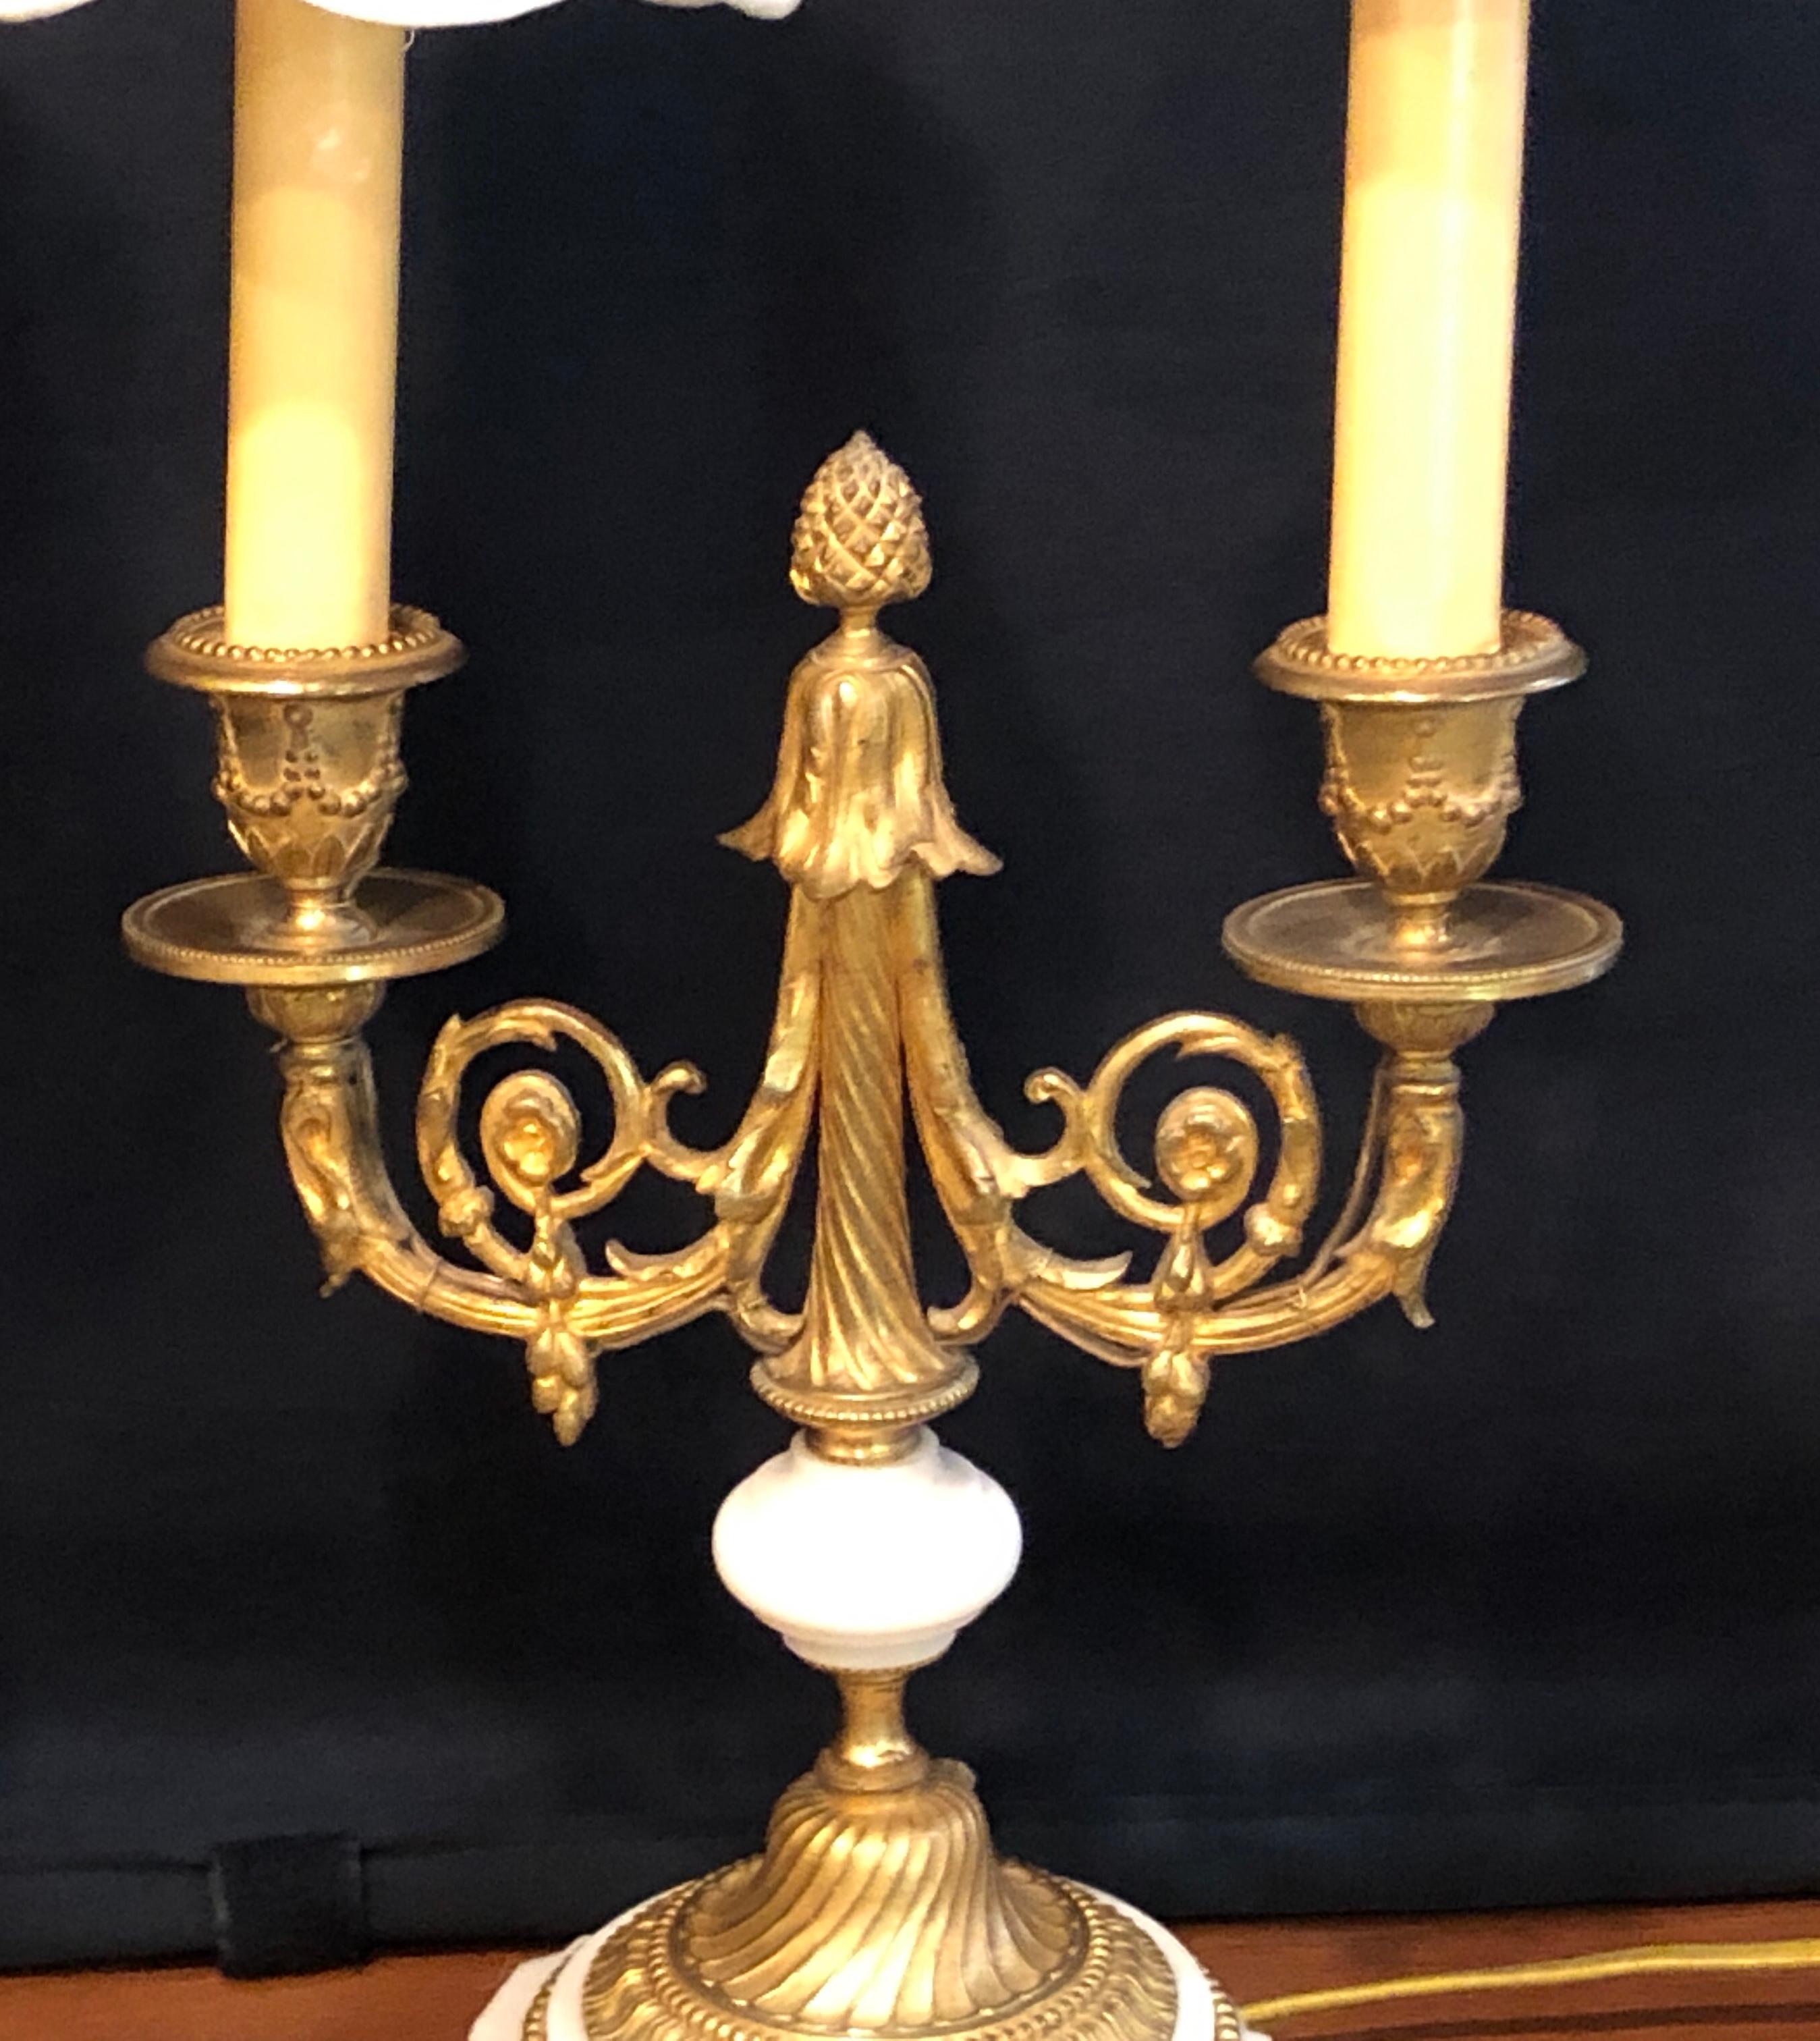 Pair of French Louis XVI style doré bronze and marble candelabra or table lamps. These fine 19th- early 20th century table lamps are simply stunning with the finest doré bronze castings one could hope for. Sitting on bronze feet and marble bases and